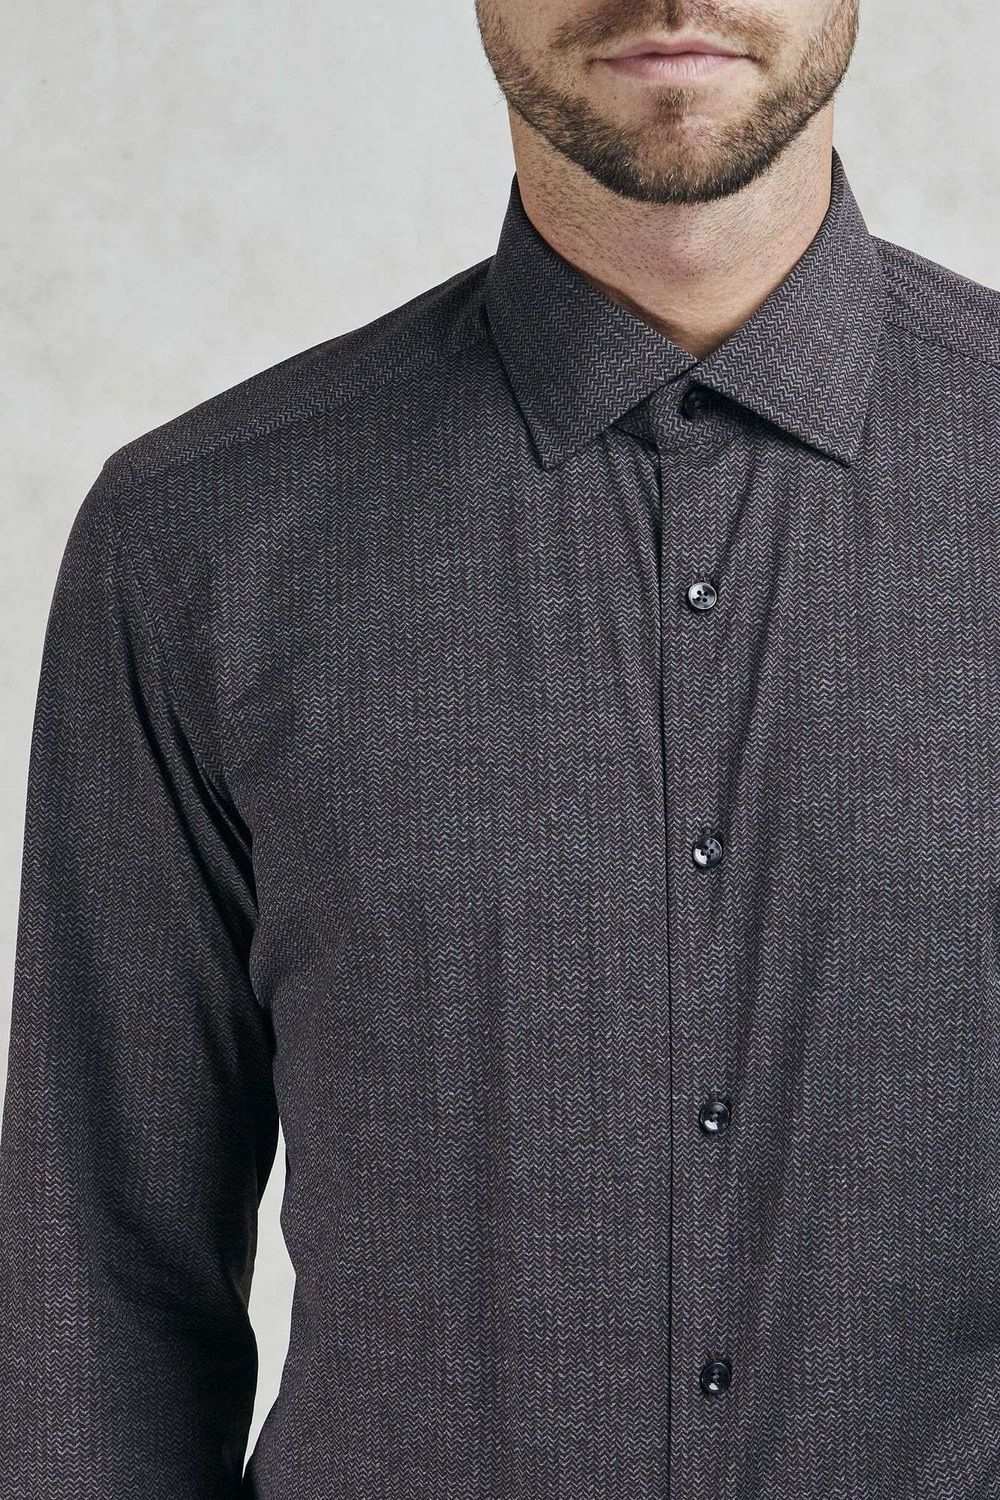 Shirt with textured pattern - 4